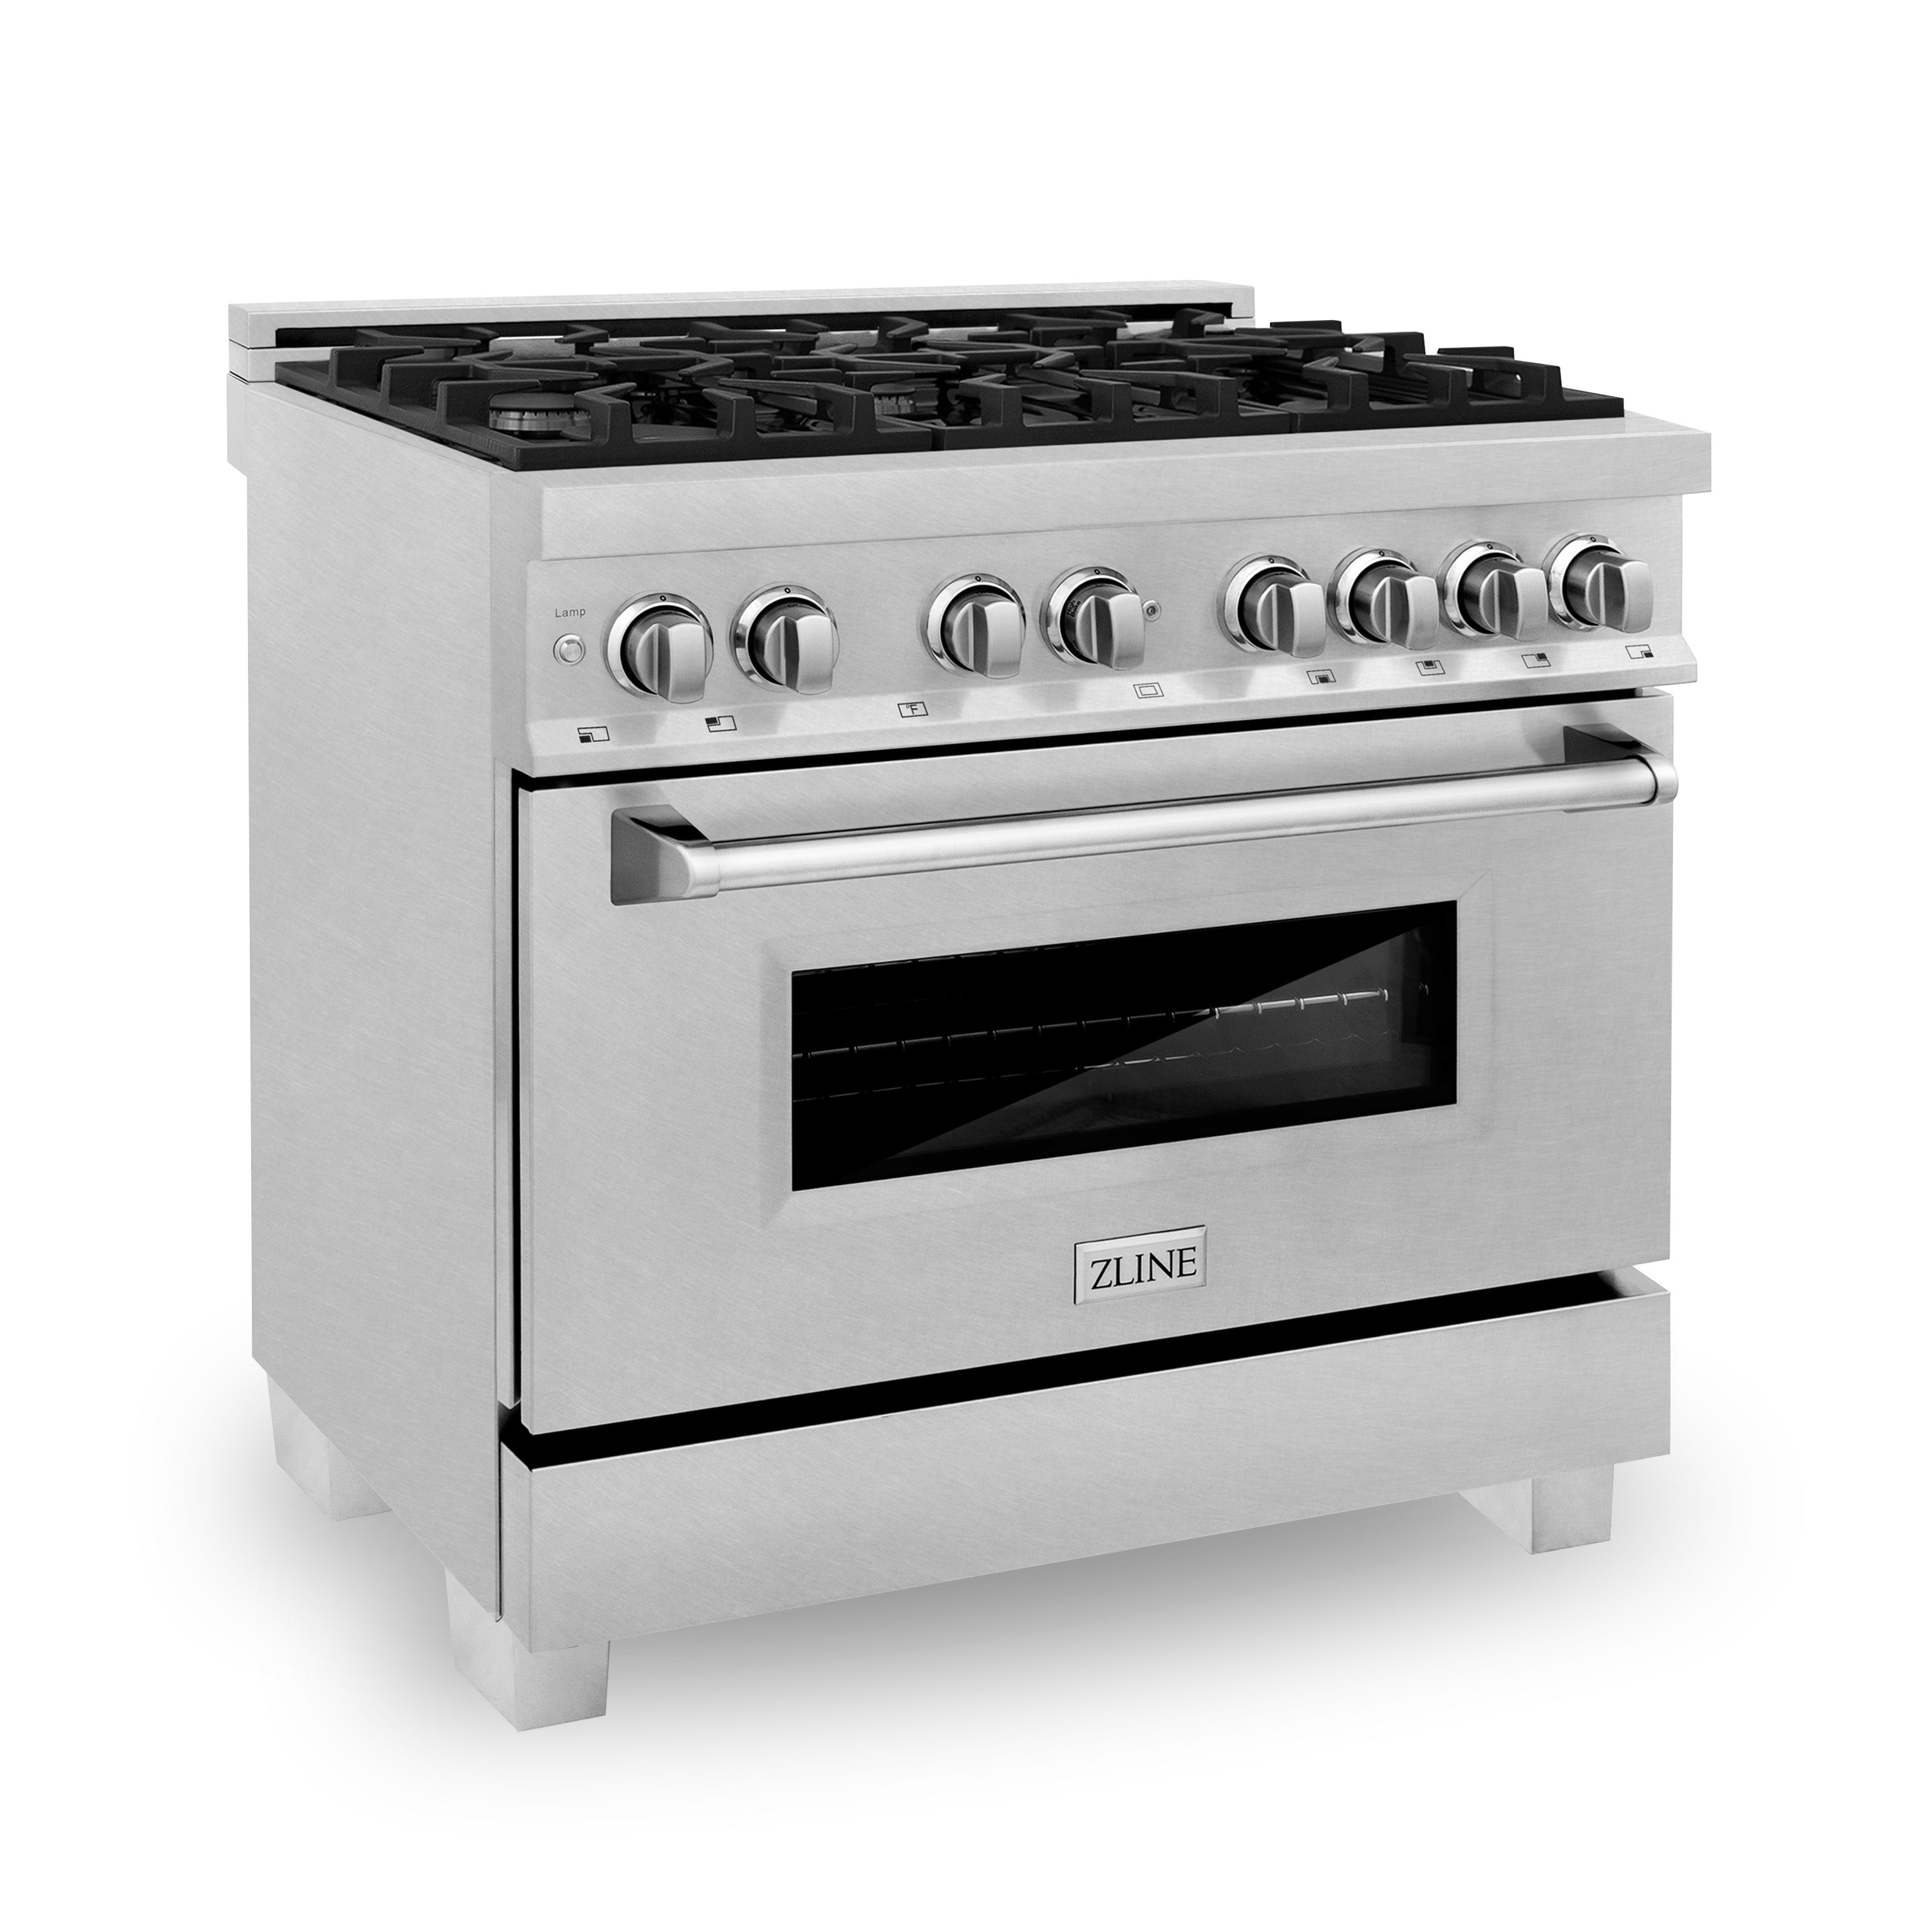 ZLINE 36" 4.6 cu. ft. Dual Fuel Range with Gas Stove and Electric Oven in in Fingerprint Resistant Stainless Steel (RAS-SN-36)